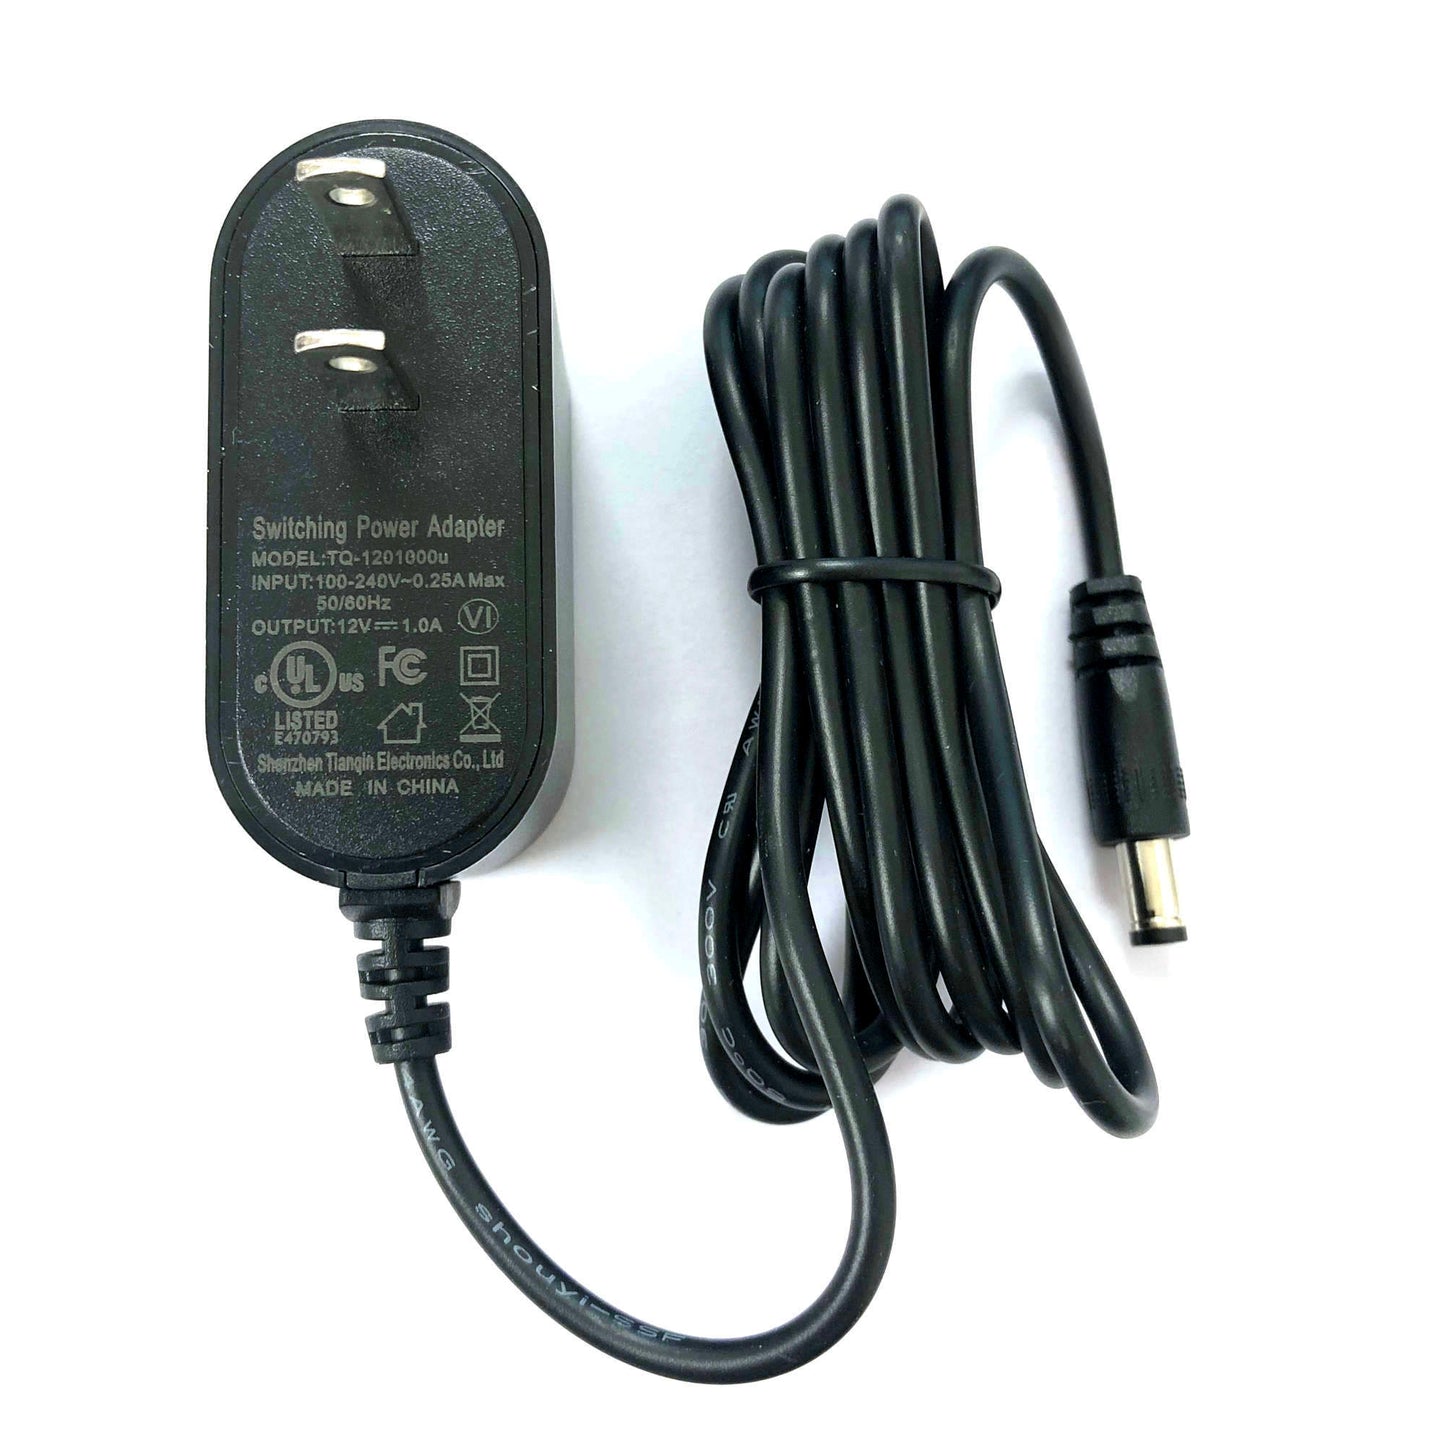 Regulated Switching Wall Power Supply Adapter (12V 1A/1000mA) - UL Listed